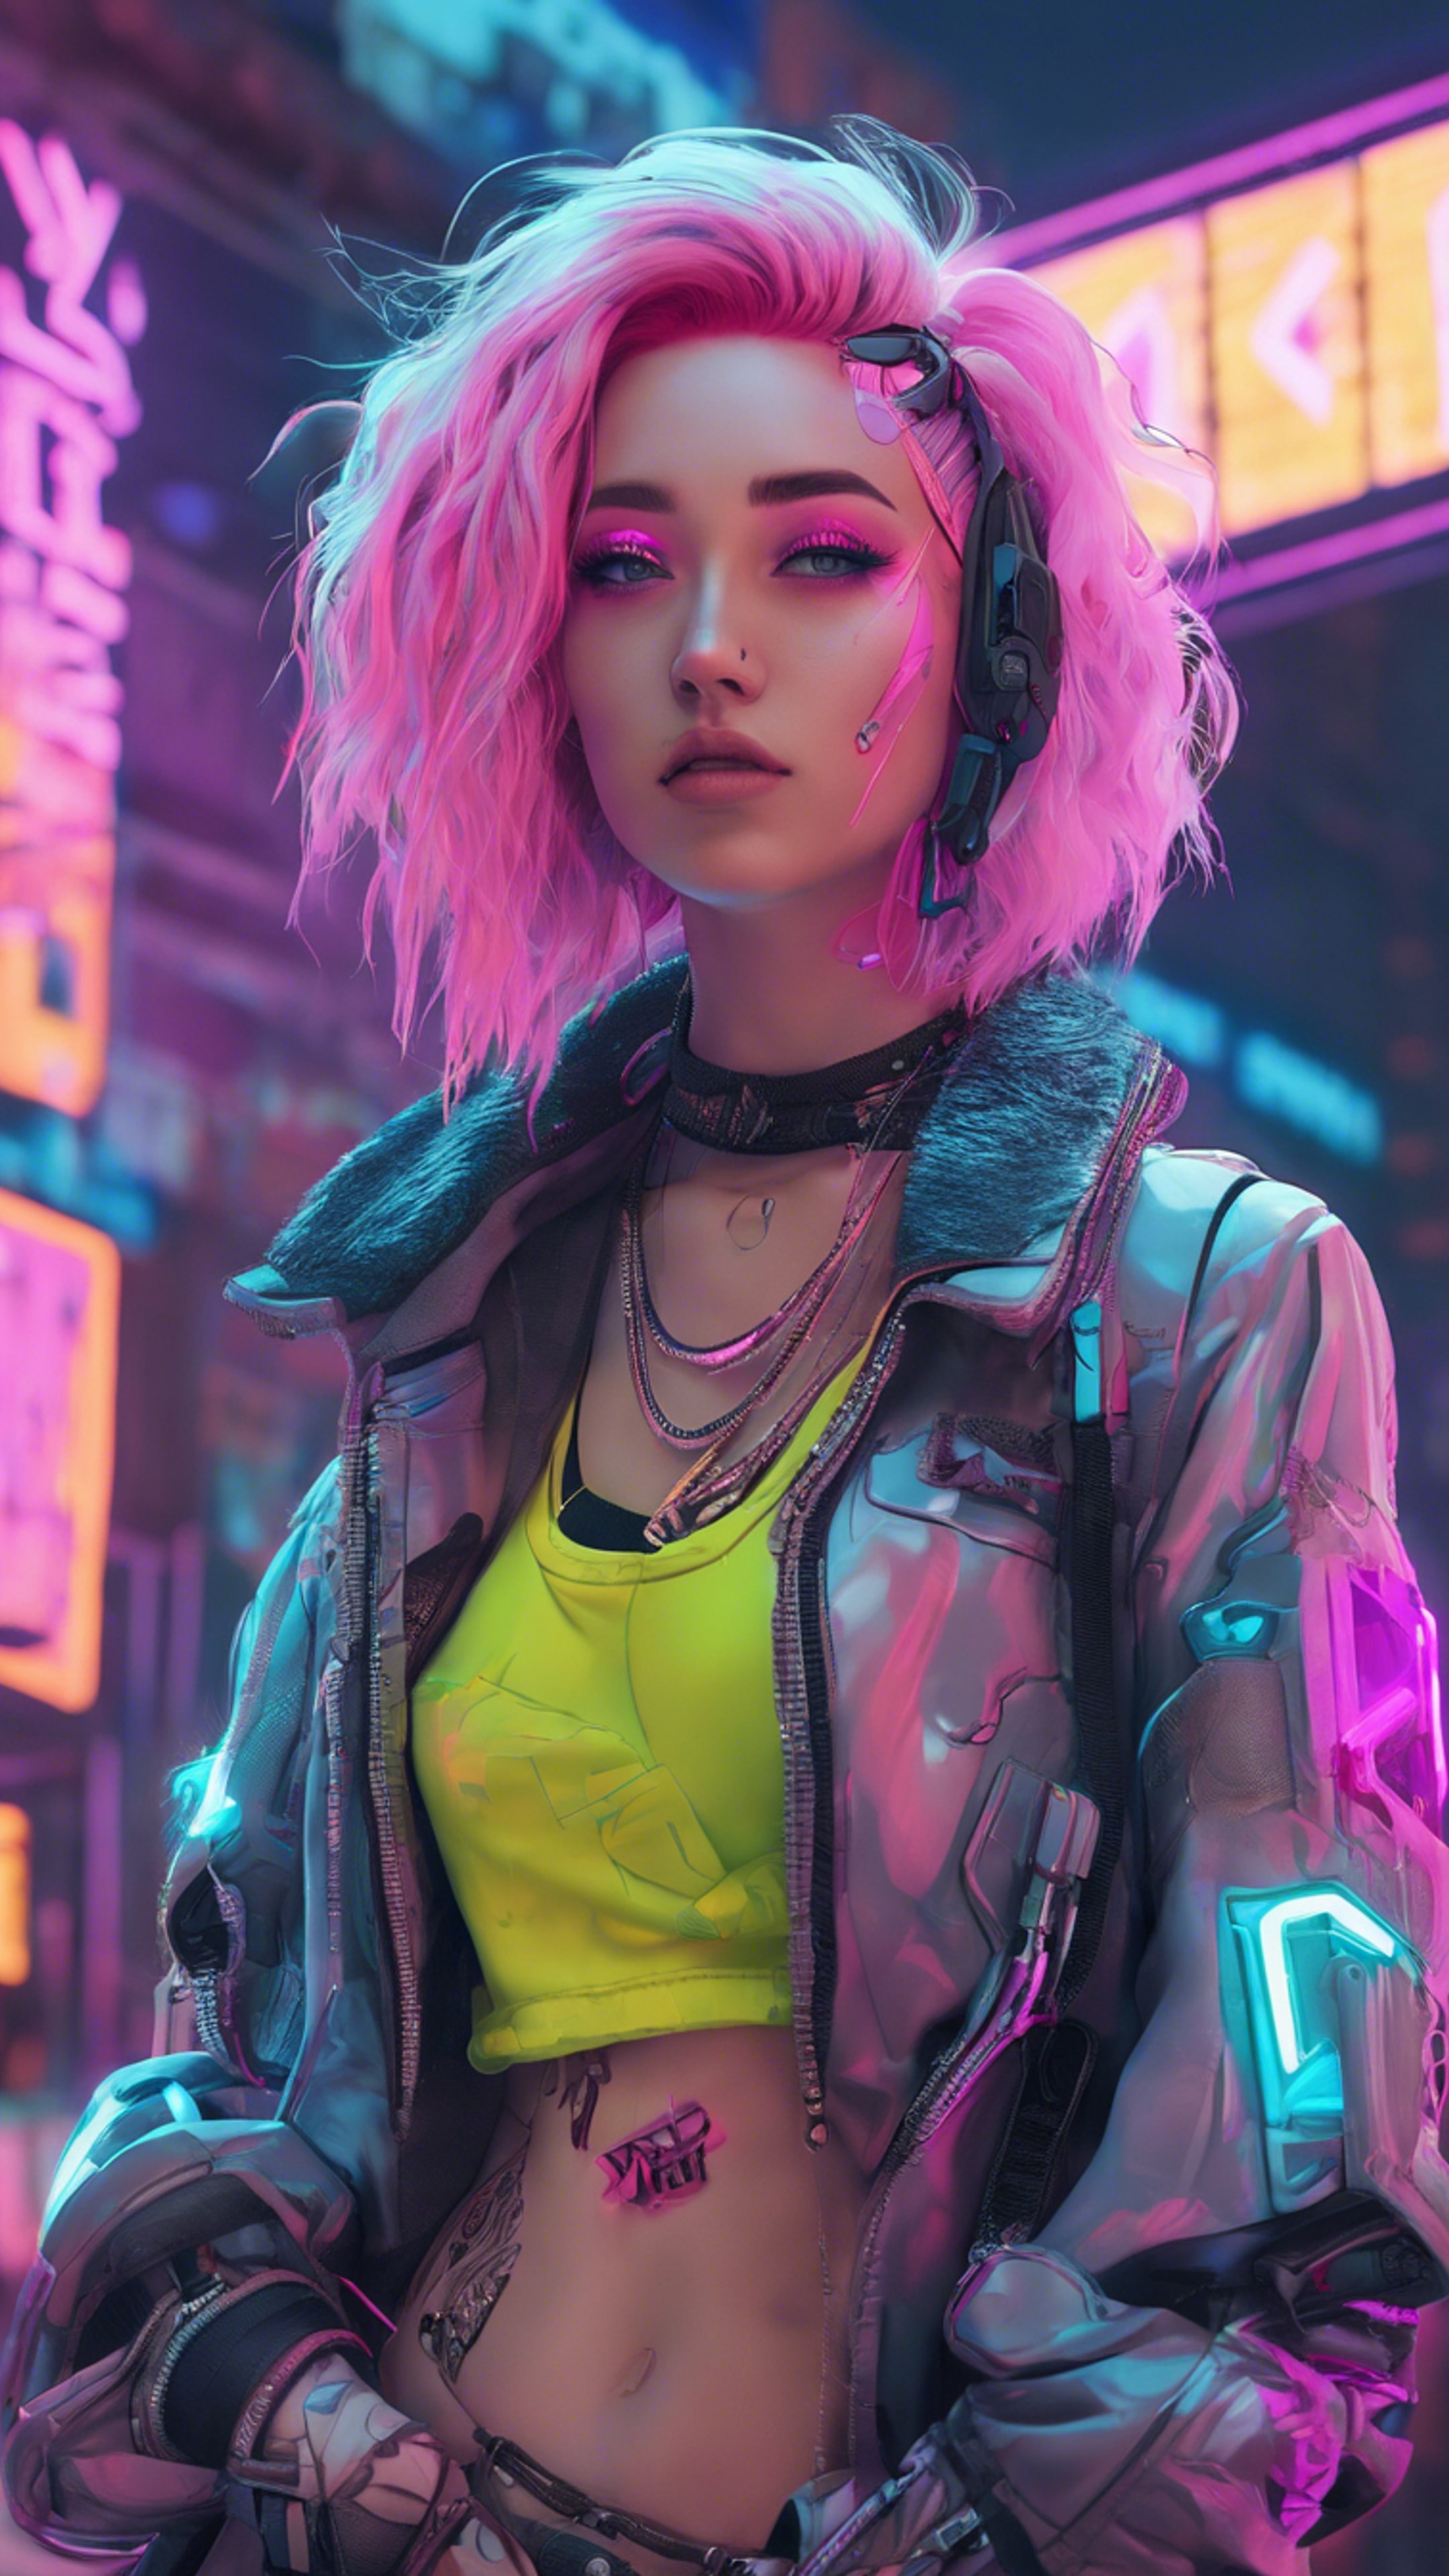 A pastel cyberpunk girl with brightly colored hair, standing in front of a neon sign. ورق الجدران[dbbad63d7b584975aa4e]